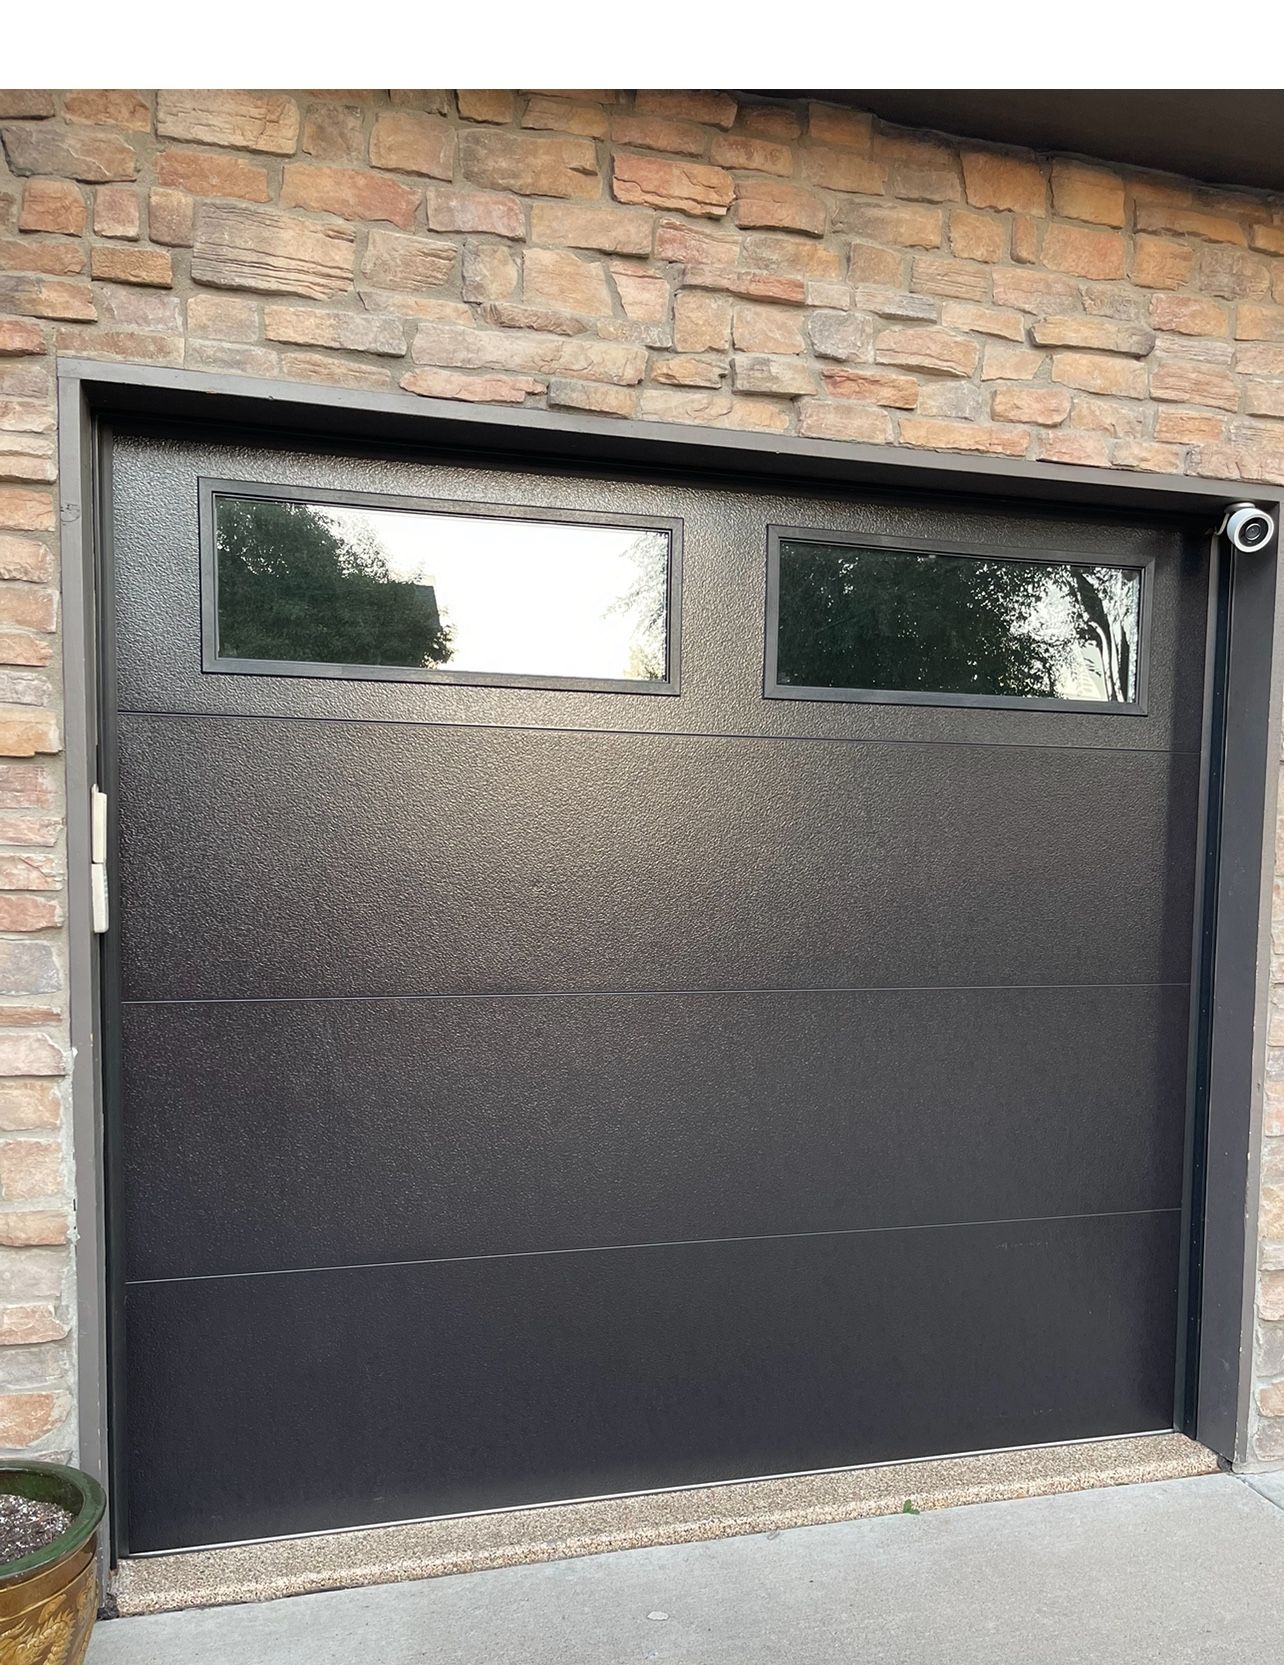 Clopay 9x8 R20 Insulated Door. Less Than 3 Years Old 